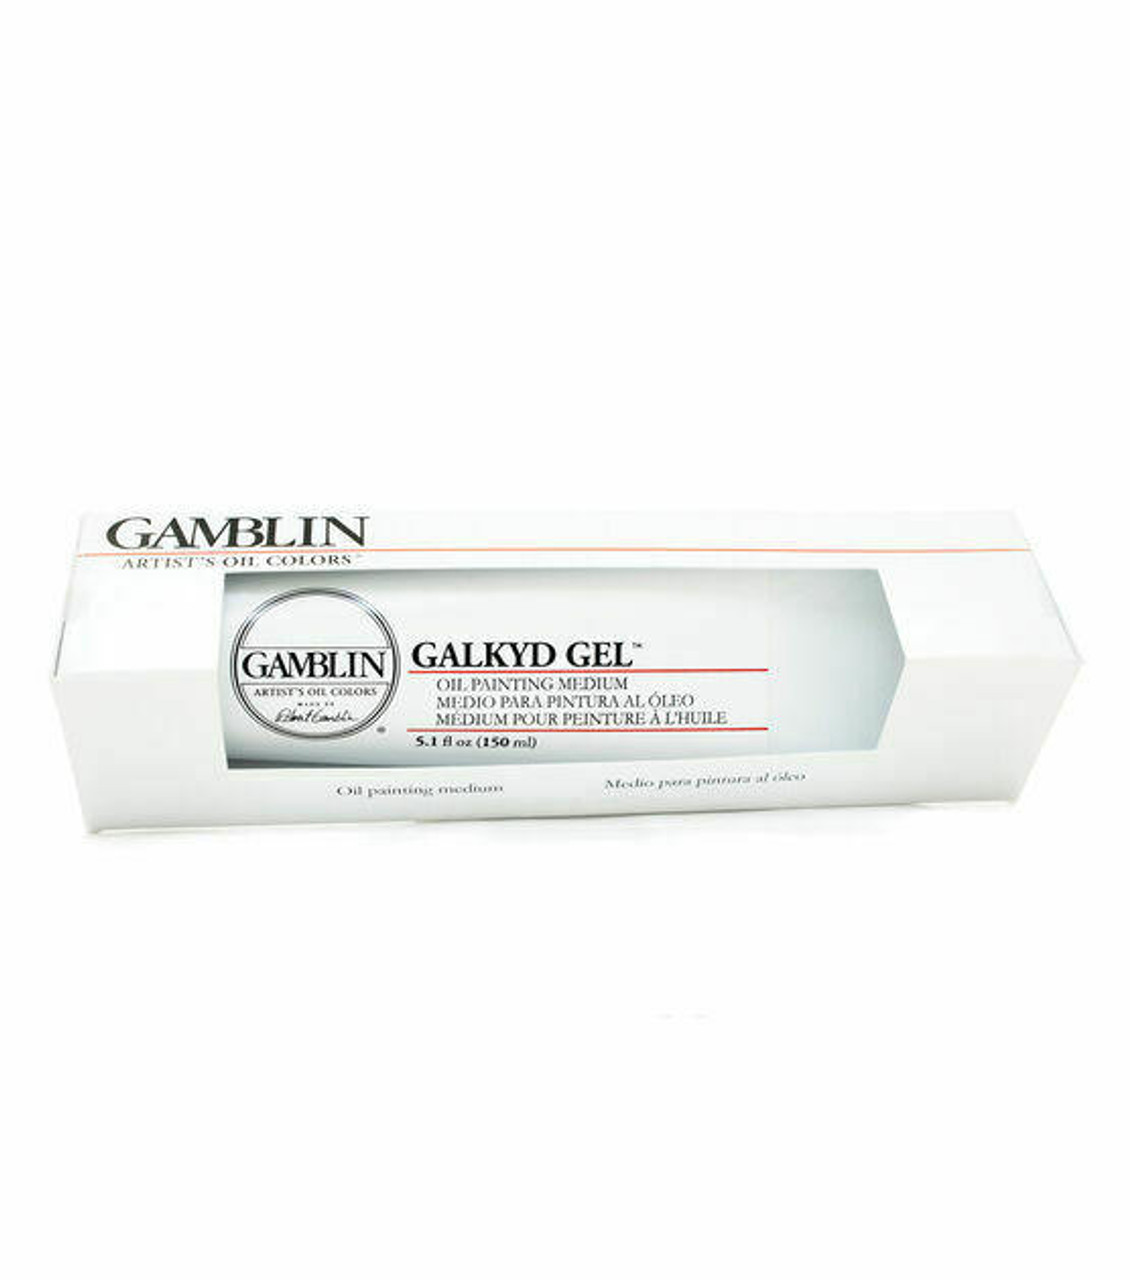 Gamblin Galkyd and Winsor 7 Newton Safflower Oil, Oil Painting Mediums New